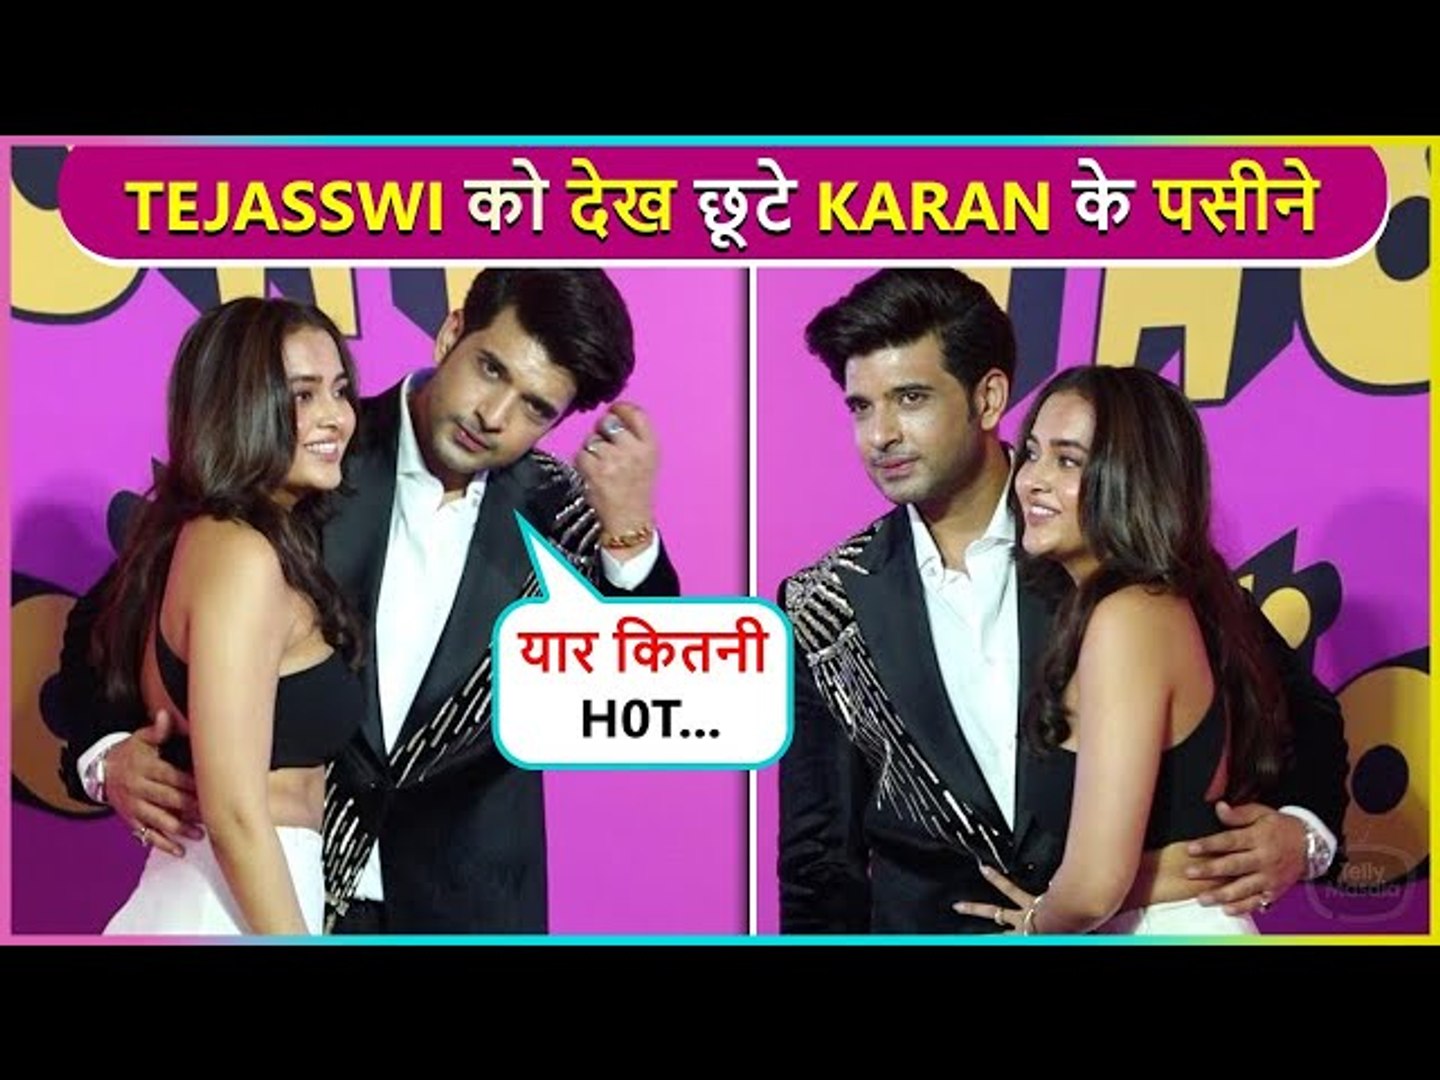 Karan Kundrra Compliments Gf Tejasswi In Public Thank You For Coming